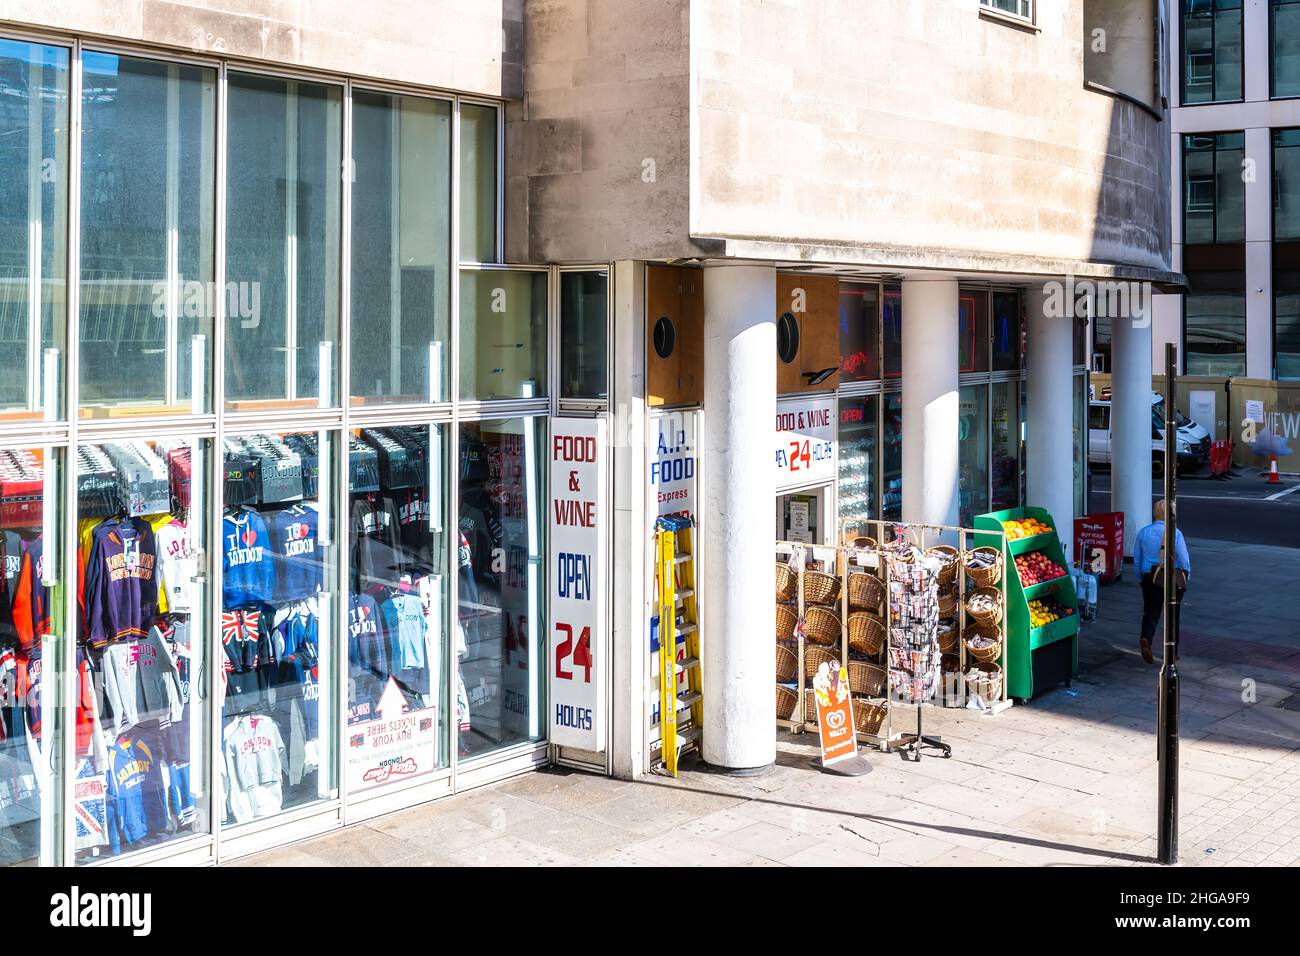 London, UK - June 22, 2018: Neighborhood local store A.P. food express grocery shopping storefront facade exterior entrance with souvenir shirts Stock Photo